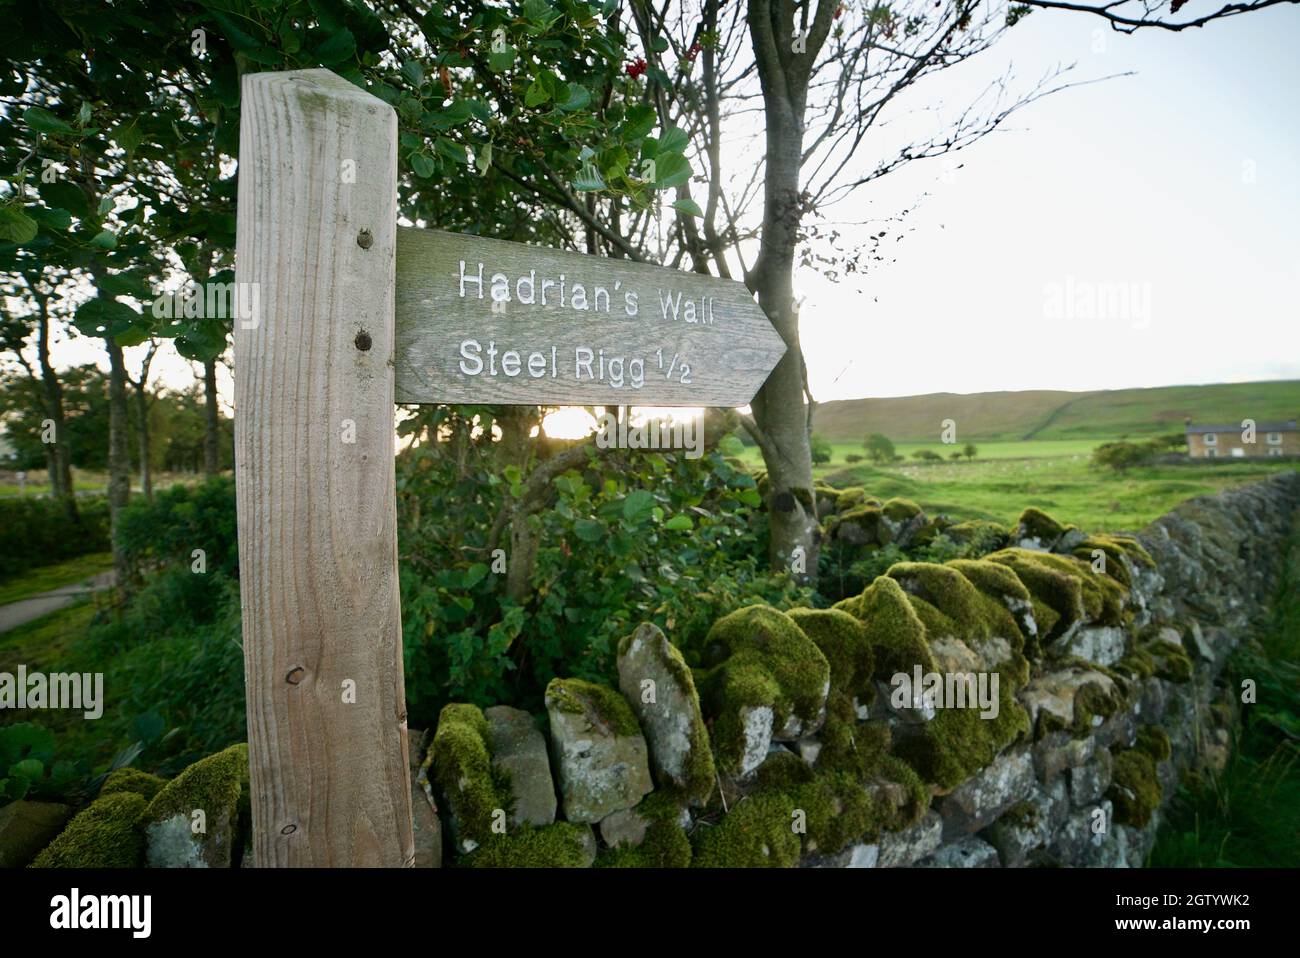 An English public footpath sign pointing to Hadrians Wall and Steel Rigg, Northumberland. Stock Photo